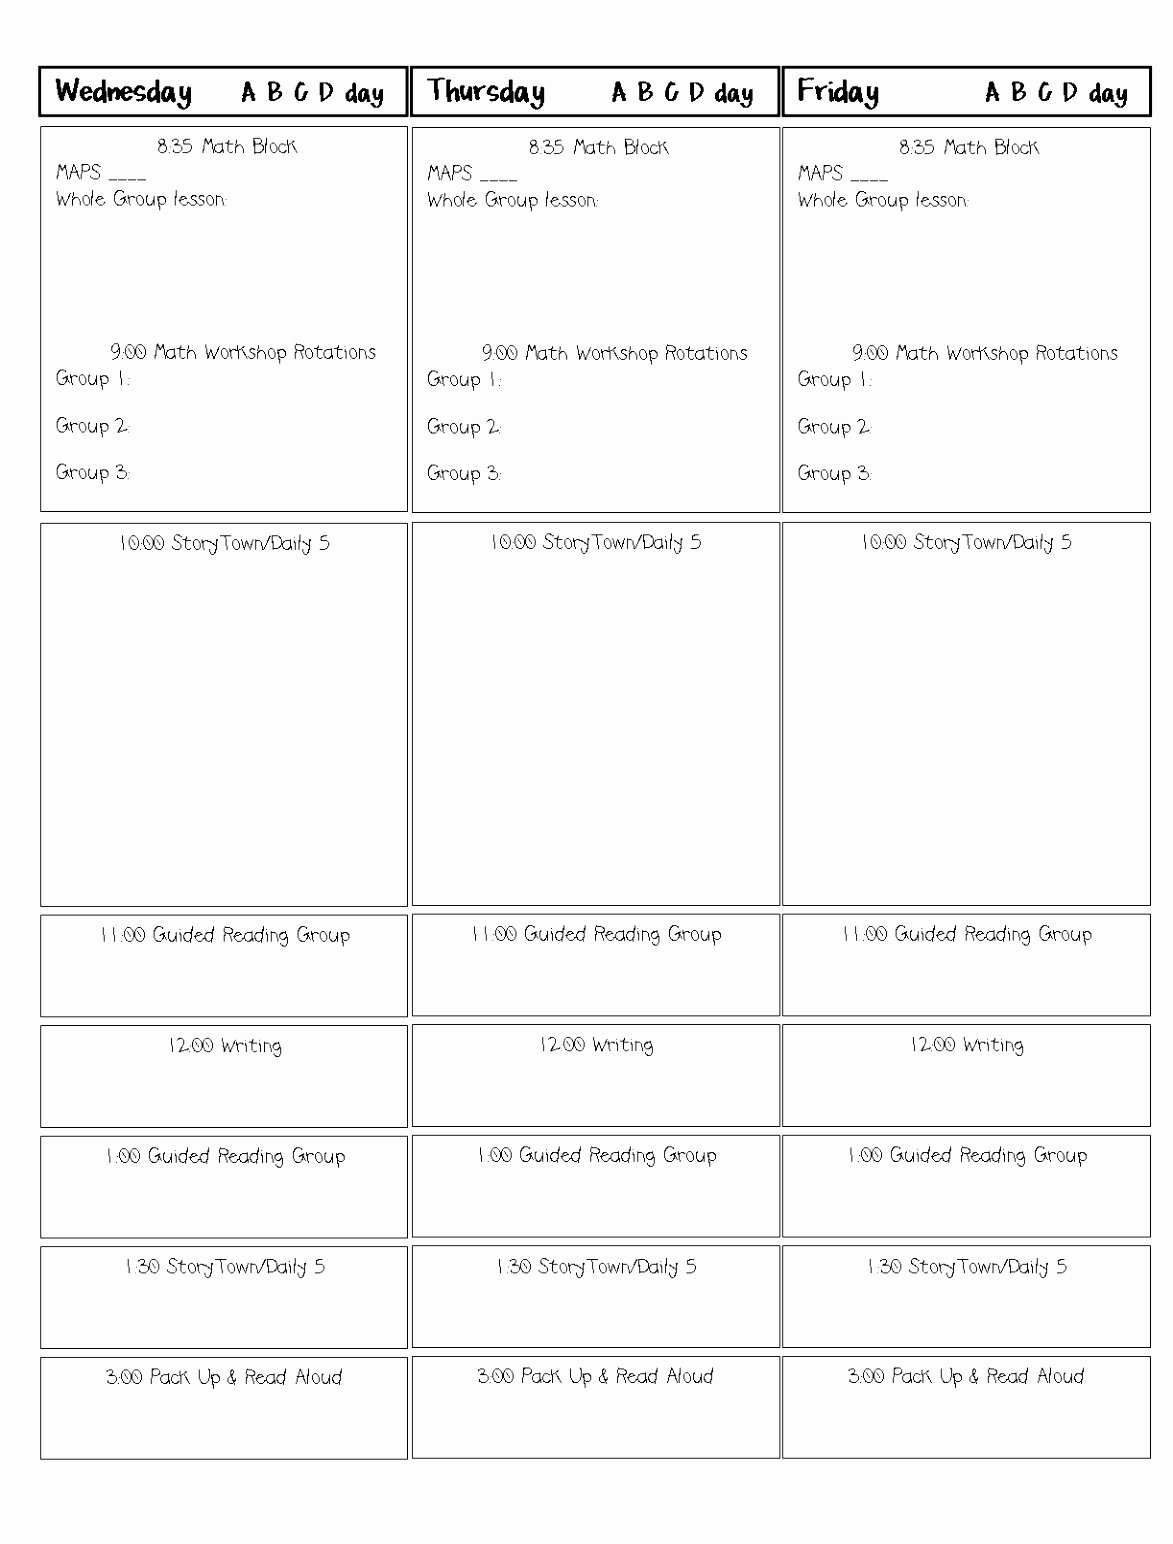 Read Aloud Lesson Plan Template Awesome 6 Risk assessment Proforma Template